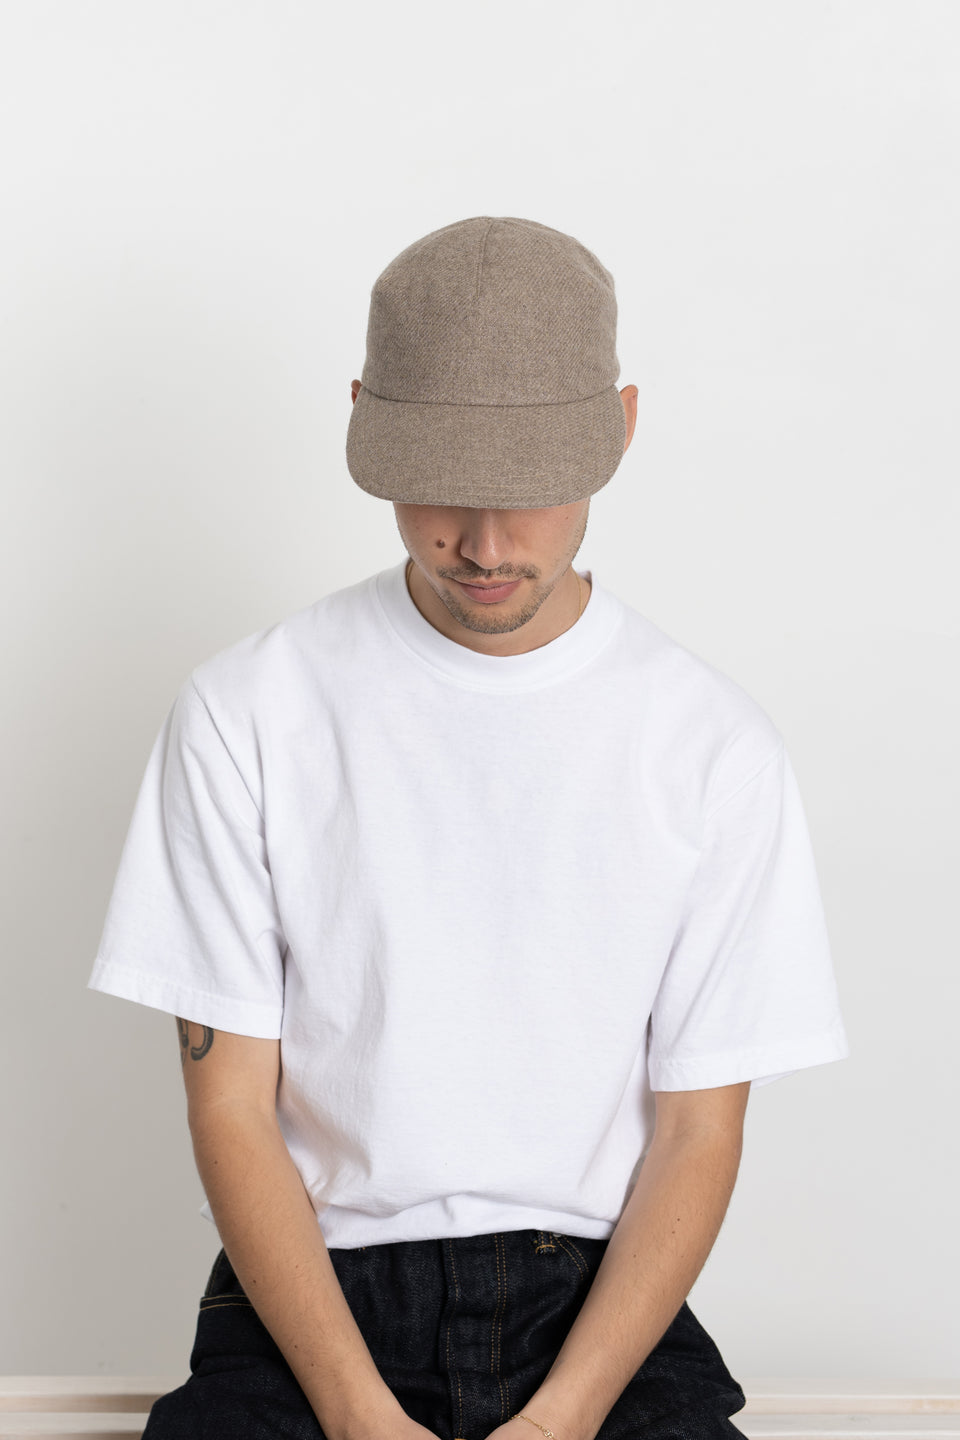 Found Feather Made in Japan Men's Collection FW23 1 Panel Cap Mélange Wool Beige Calculus Victoria BC Canada